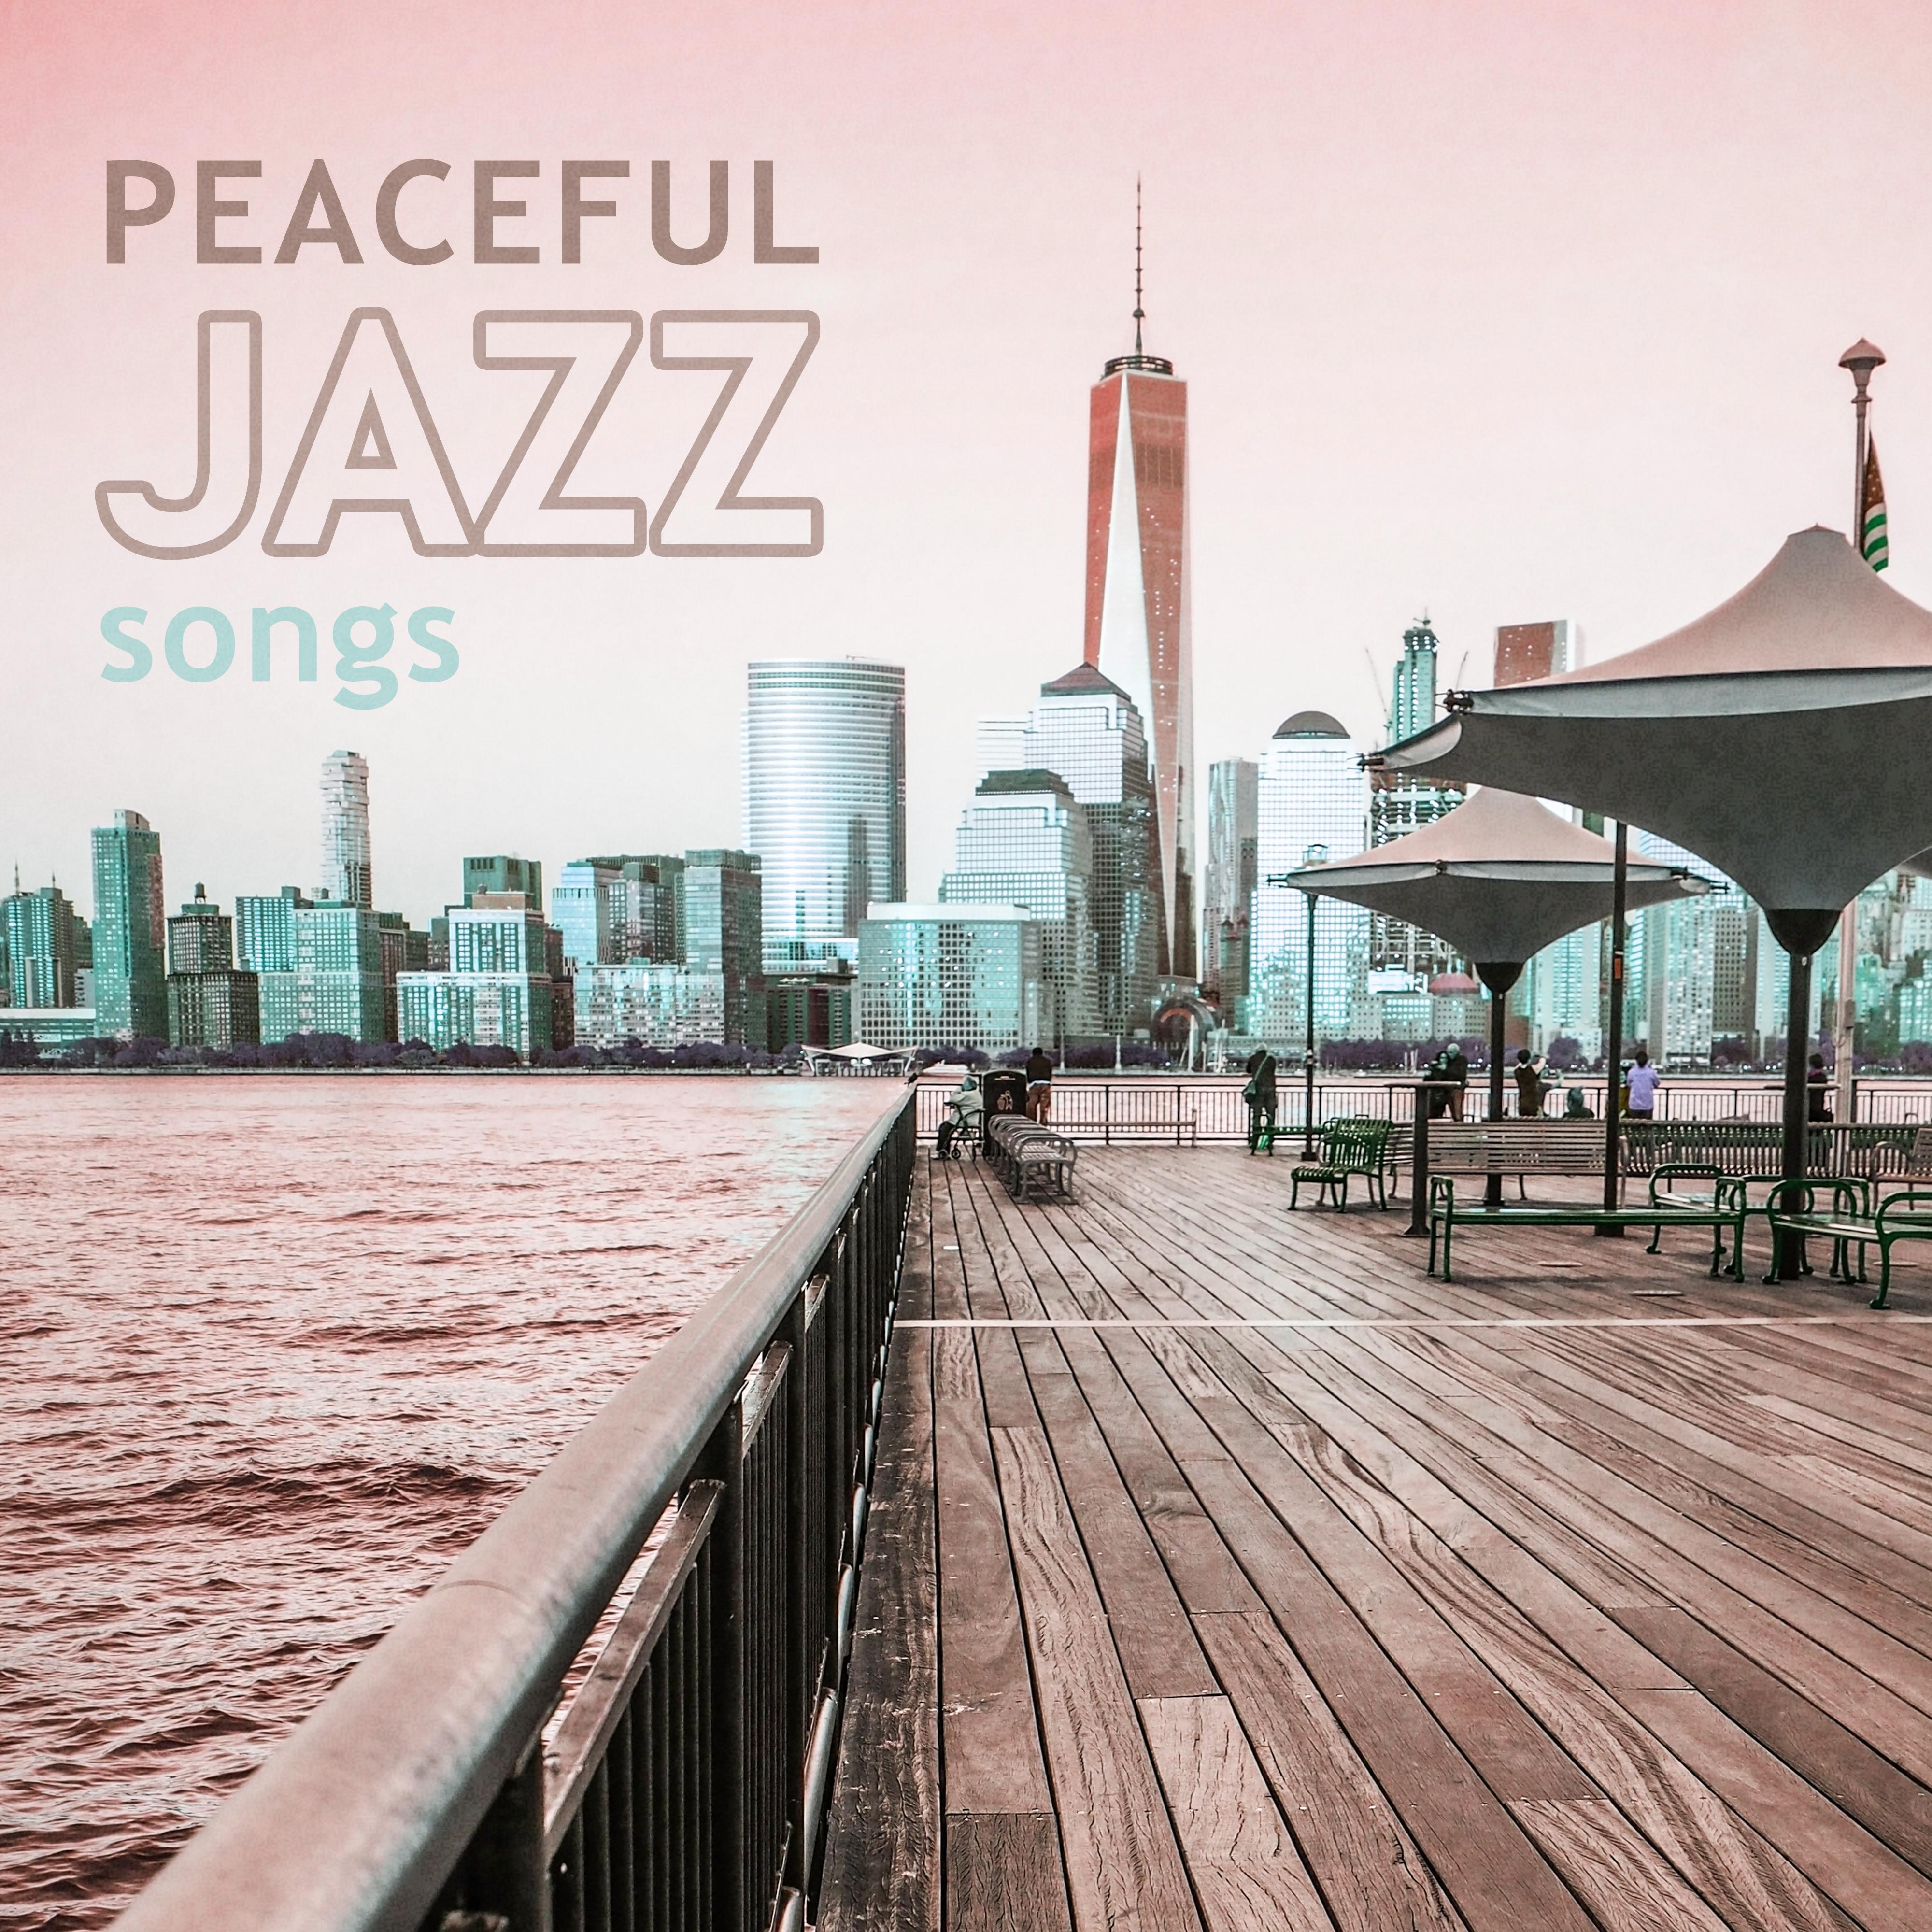 Peaceful Jazz Songs  Calming Jazz, Instrumental Music, Easy Listening Piano Session, Soft Sounds of Jazz